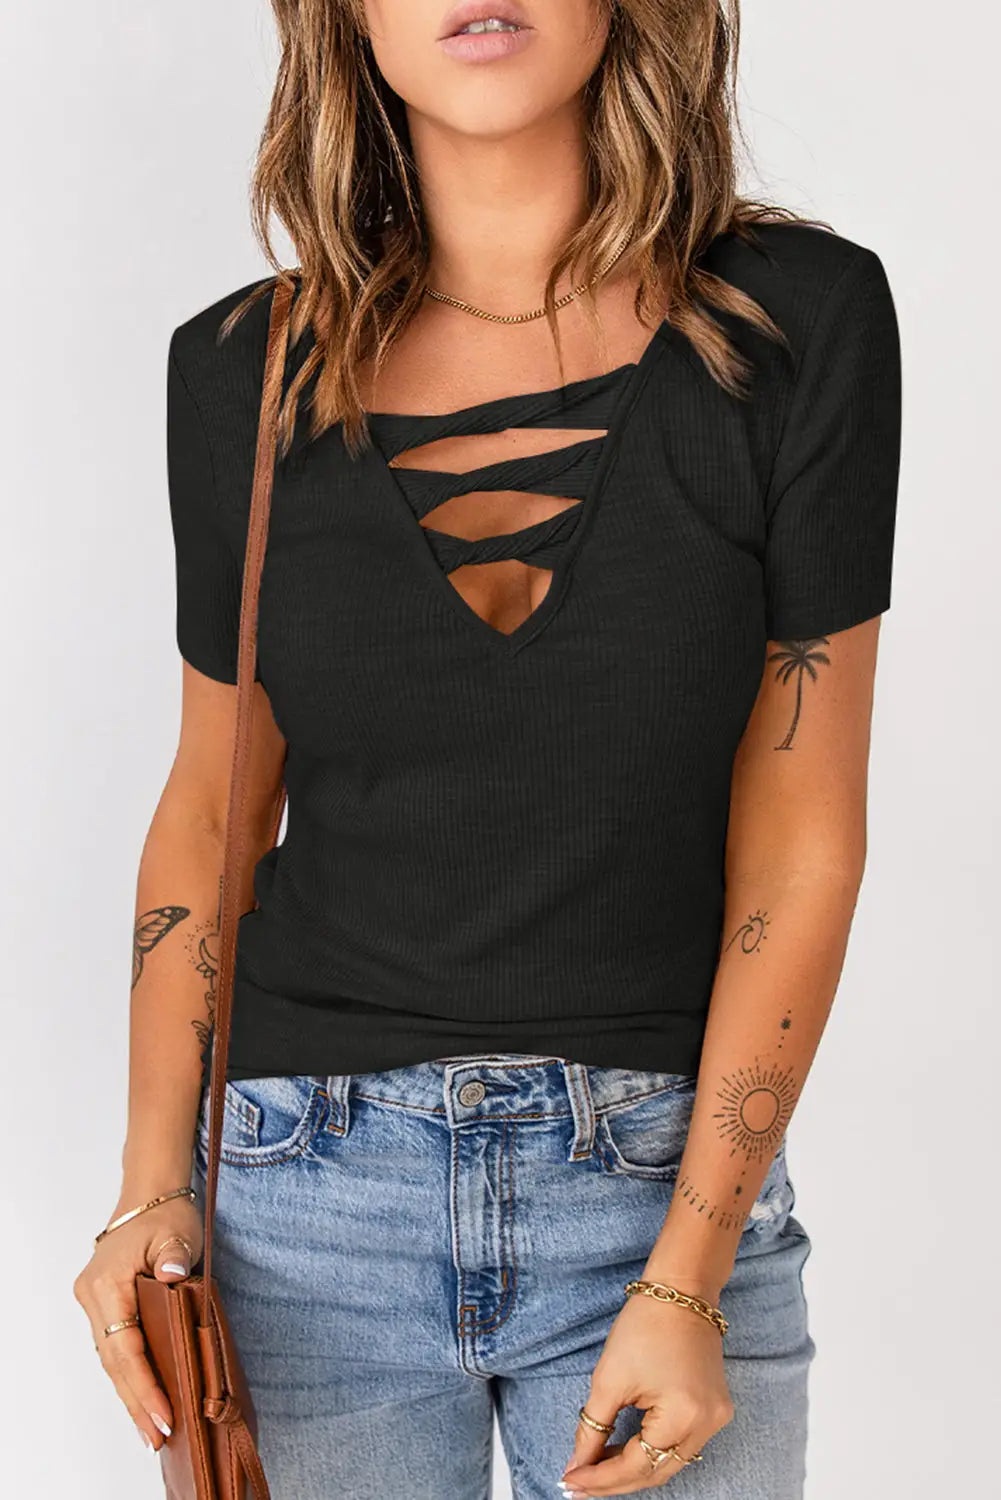 Apricot strappy hollow-out neck rib knit t shirt - tops